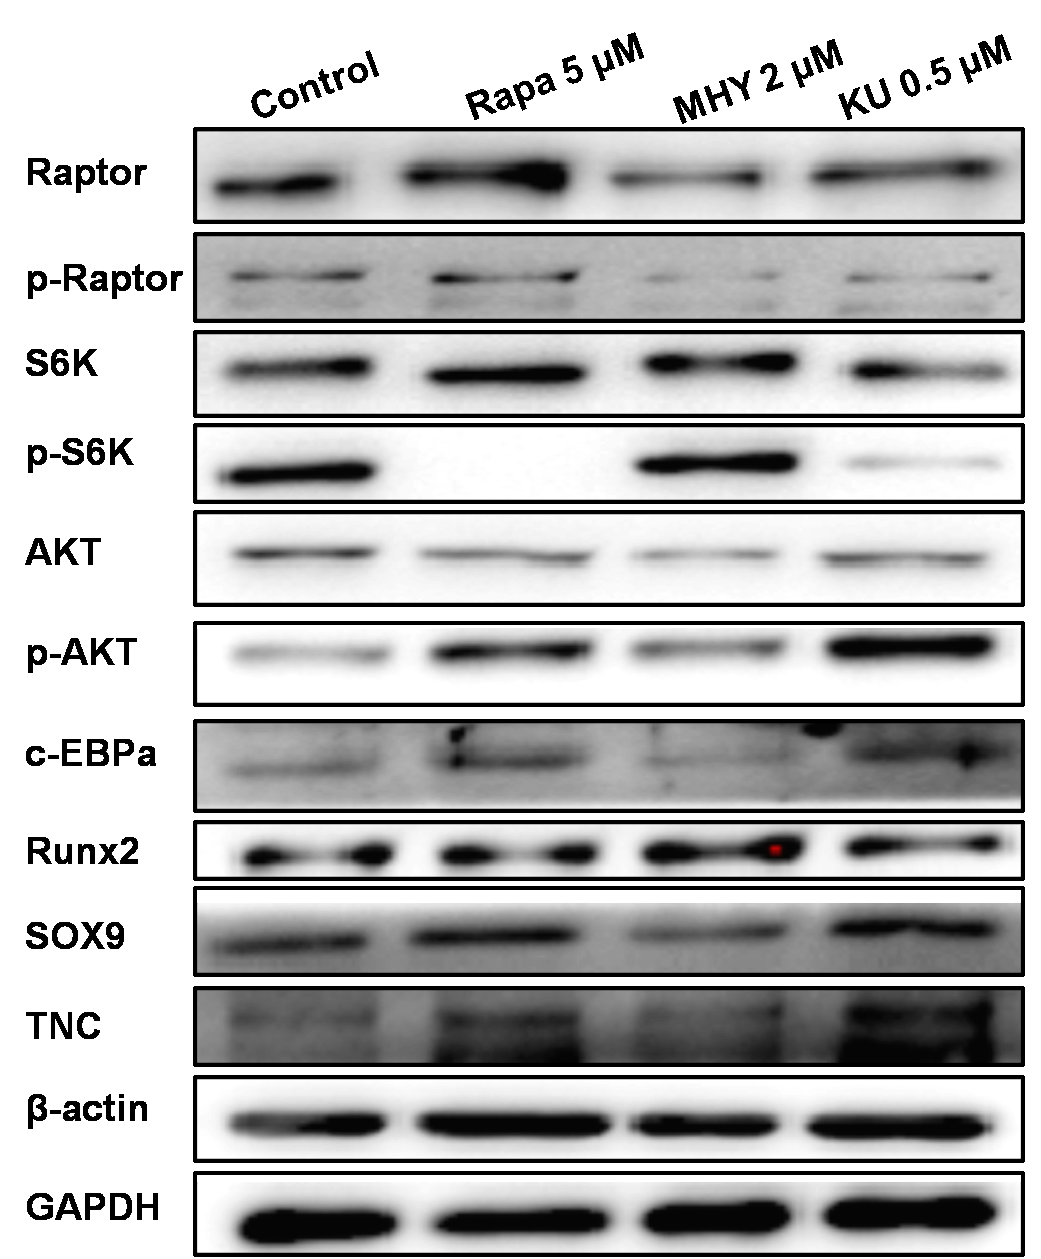 Figure 7 Western blot showed that rapamycin and KU-0062794 blocked the phosphoration of Raptor and S6k; also mTOR2 was activated by MHY1485, which confirmed by the phosphoration of AKT. MHY1485 effectively activated the phosphoration of S6k and AKT. Blocking of mTOR1 by Rapamycin or blocking both of mTOR1 and mTOR2 enhanced the expression of TNC; in addition, blocking of mTOR1 enhanced the expression of c-EBPα and Sox9. However, activation of mTOR1 and mTOR2 by MHY1485 increased the expression of Runx2